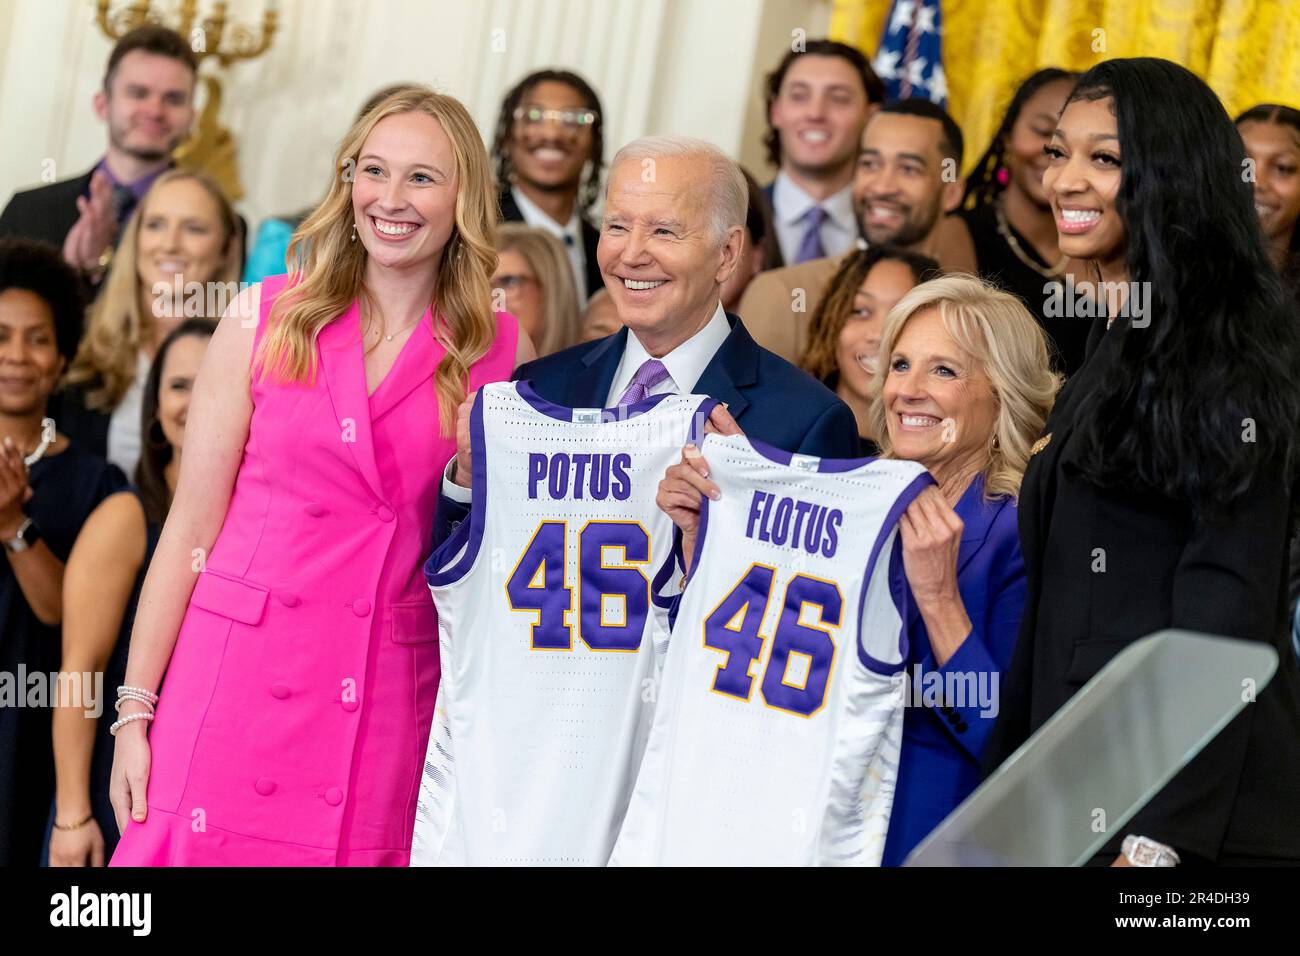 Washington, United States Of America. 26th May, 2023. Washington, United States of America. 26 May, 2023. U.S President Joe Biden, center, and First Lady Jill Biden pose with team jerseys between the LSU team co-captains Emily Ward, left, and Angel Reese, right, during an event celebrating the Louisiana State University Tigers Women's Basketball championship win in the East Room of the White House, May 26, 2023, in Washington, DC Credit: Adam Schultz/White House Photo/Alamy Live News Stock Photo